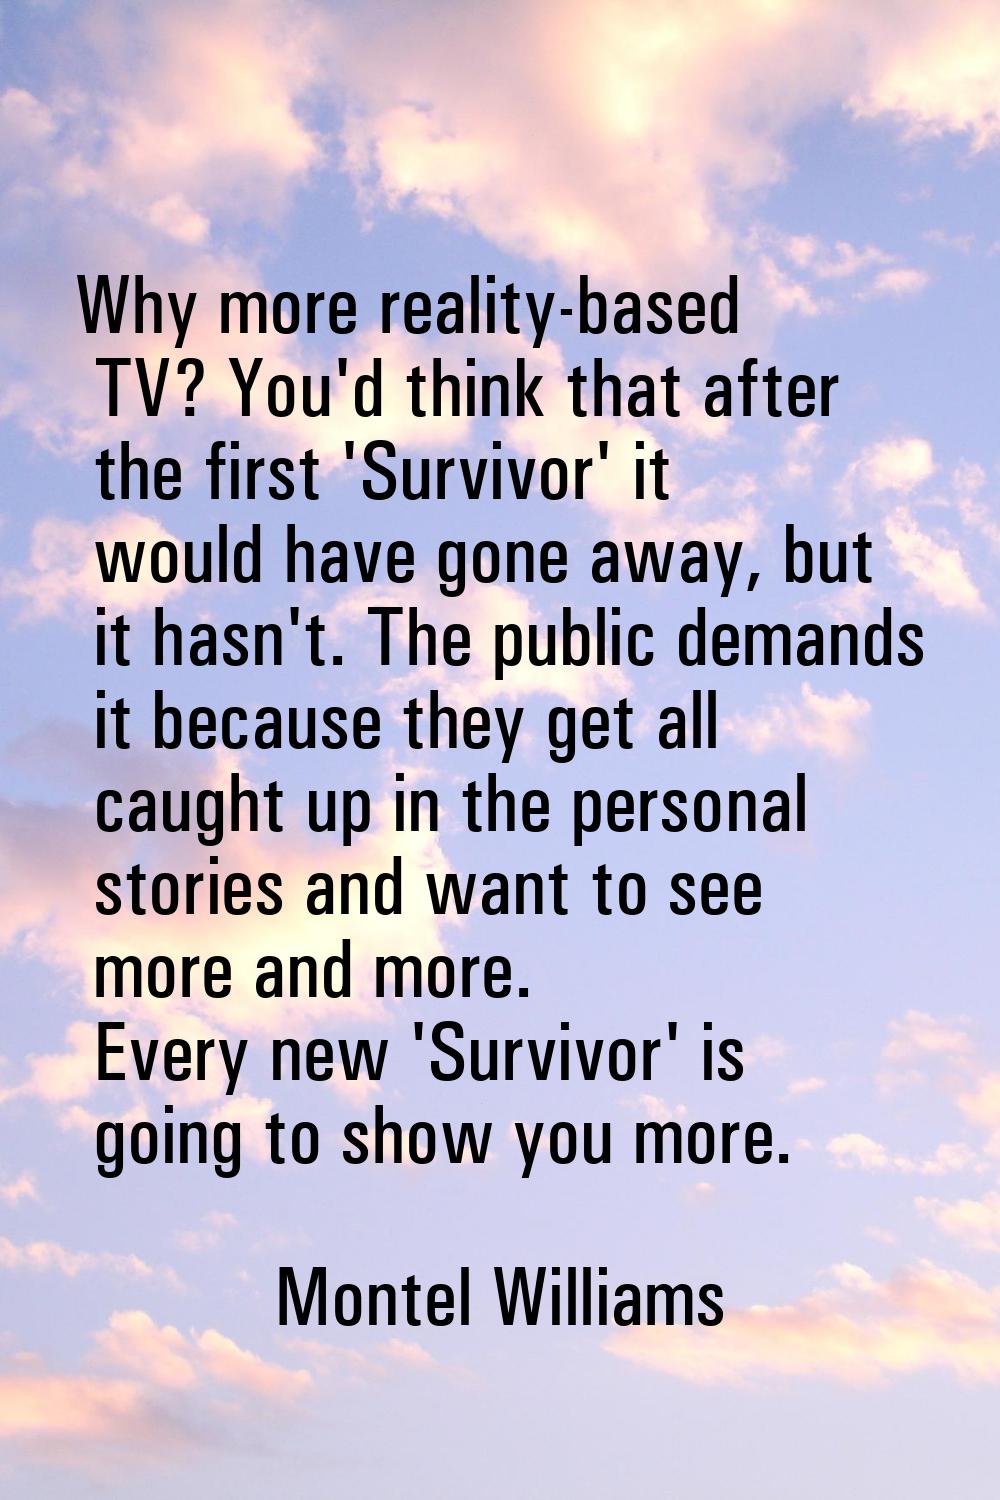 Why more reality-based TV? You'd think that after the first 'Survivor' it would have gone away, but